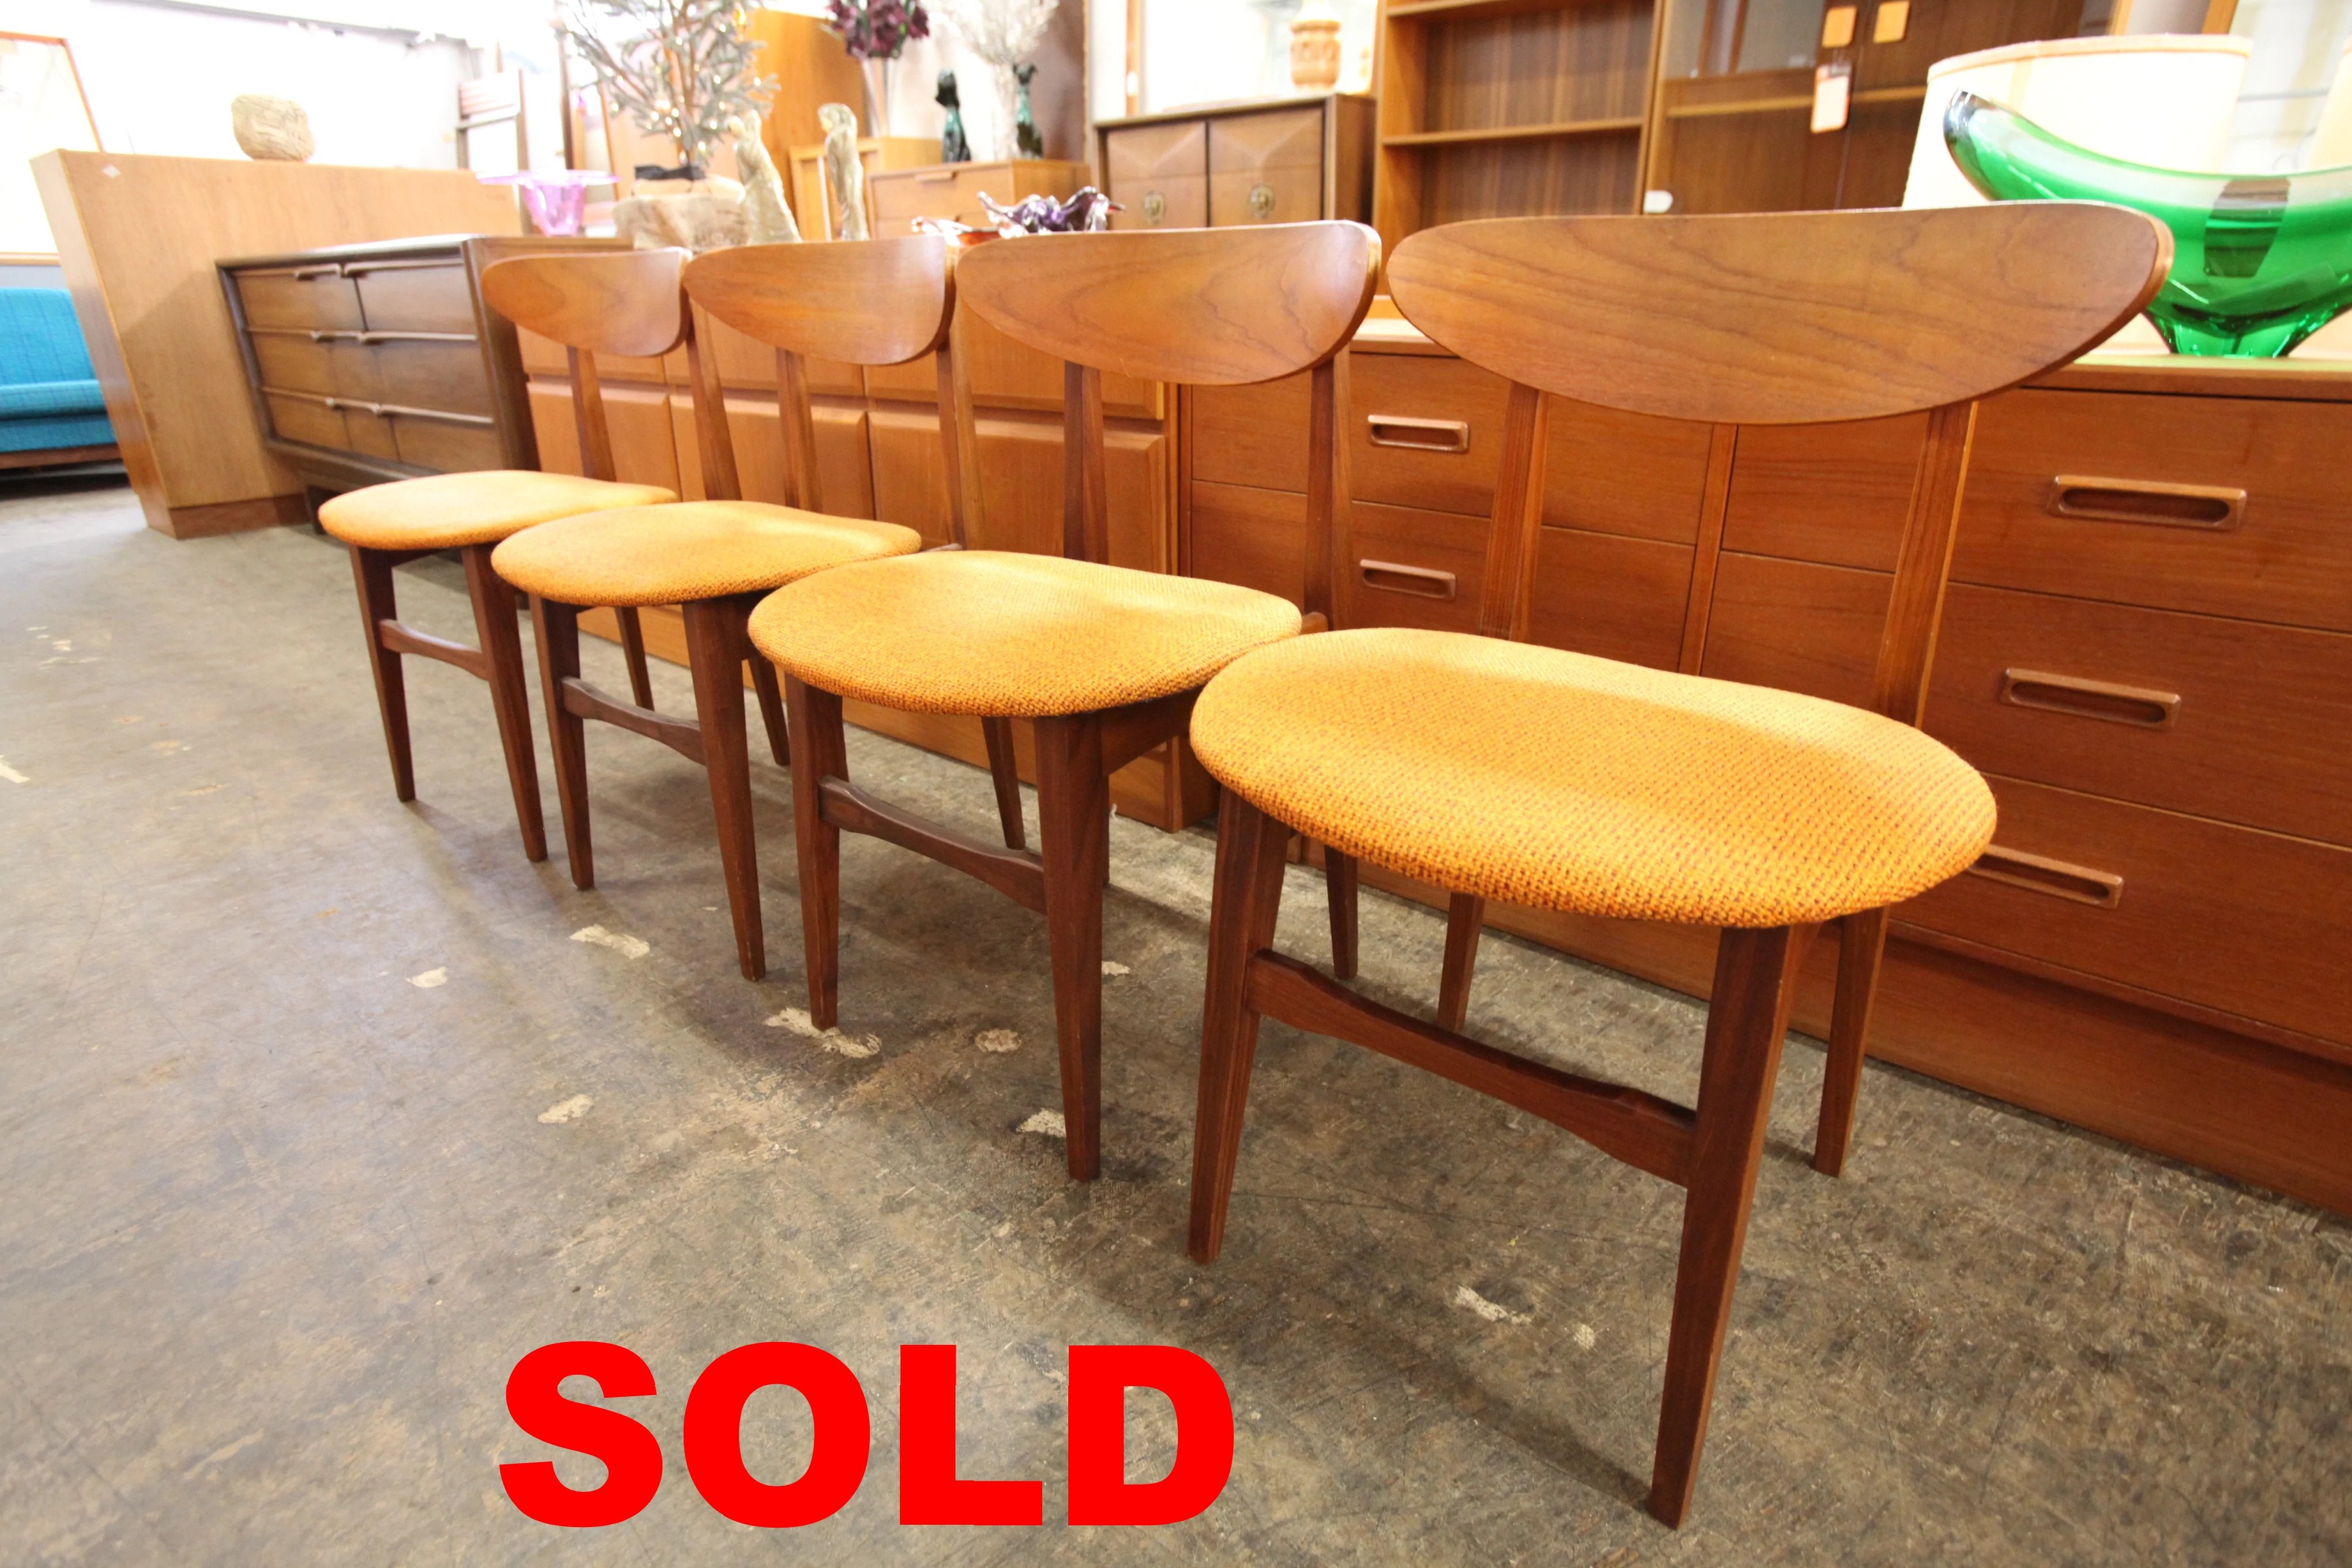 Set of 4 Vintage Wood Back Teak Dining Chairs (19"W x 18"D x 29.5"H)